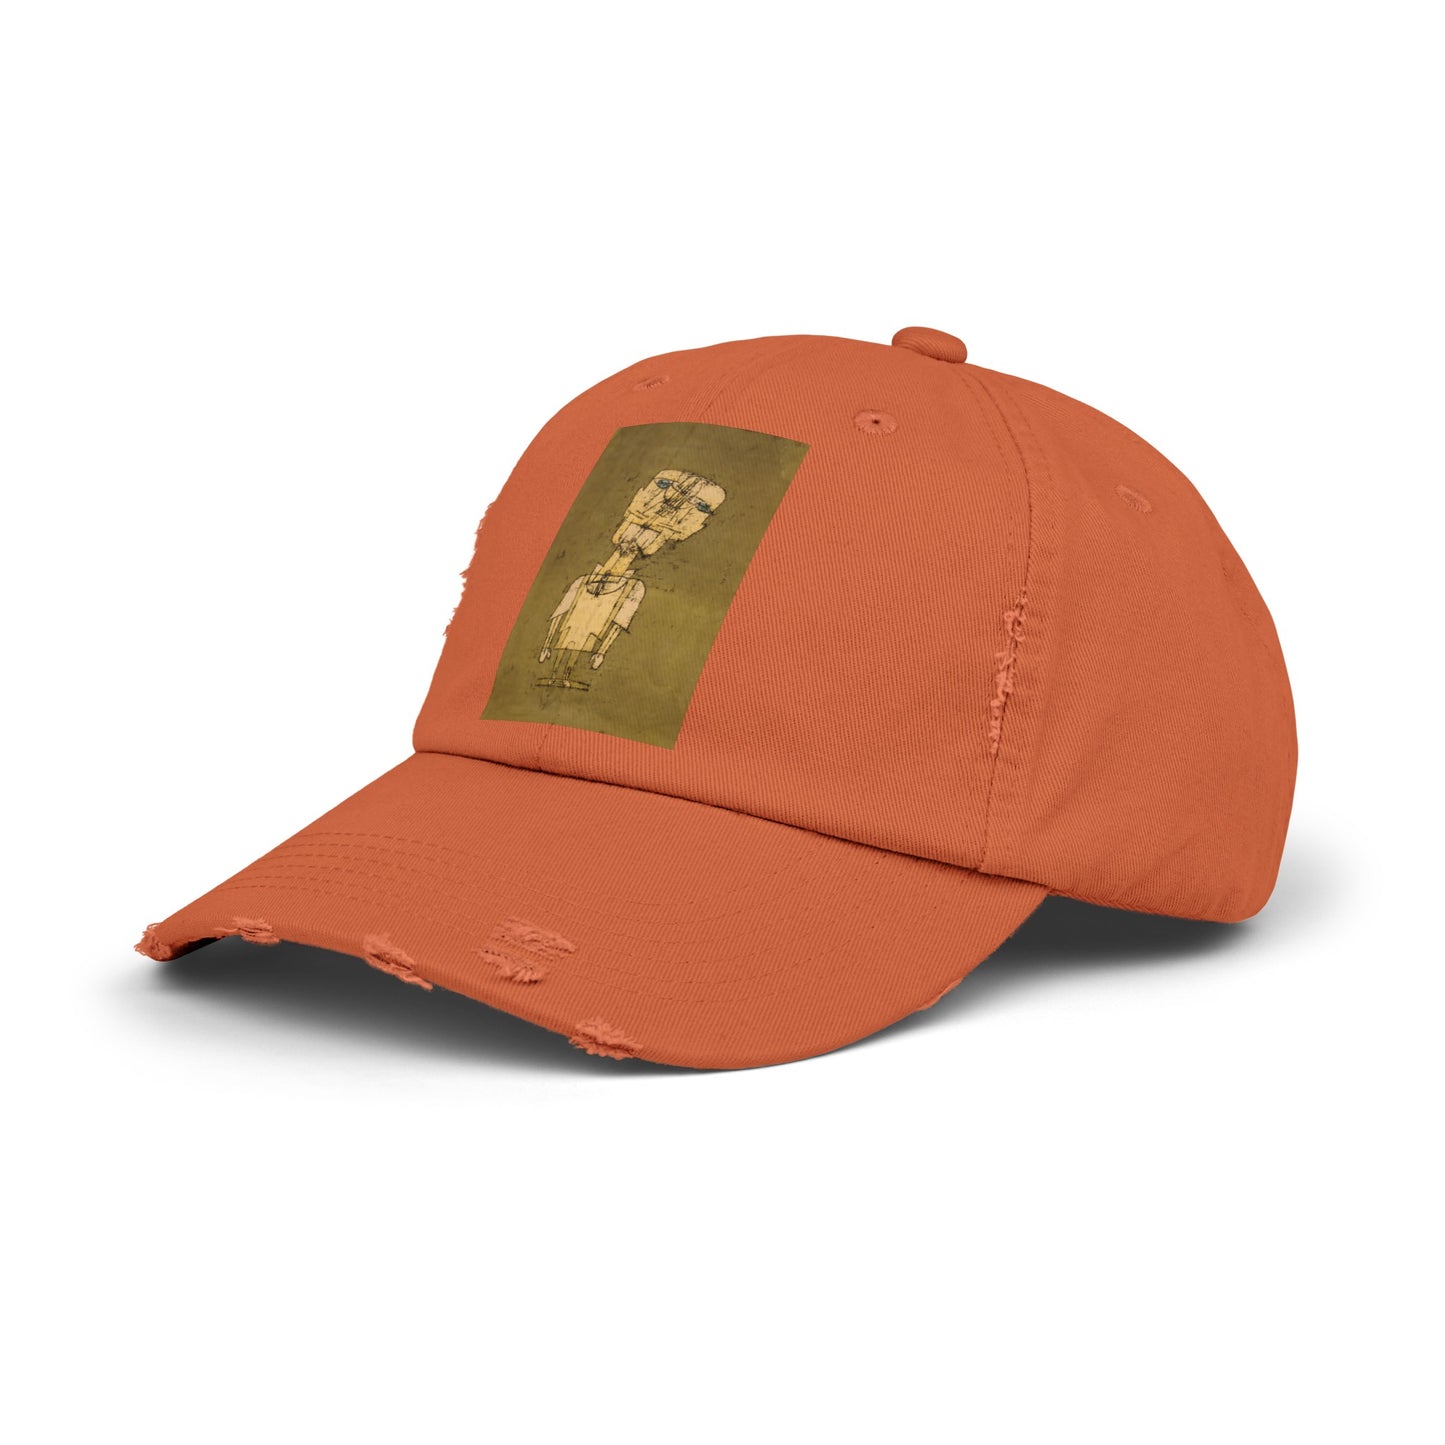 a baseball cap with a picture of a woman on it